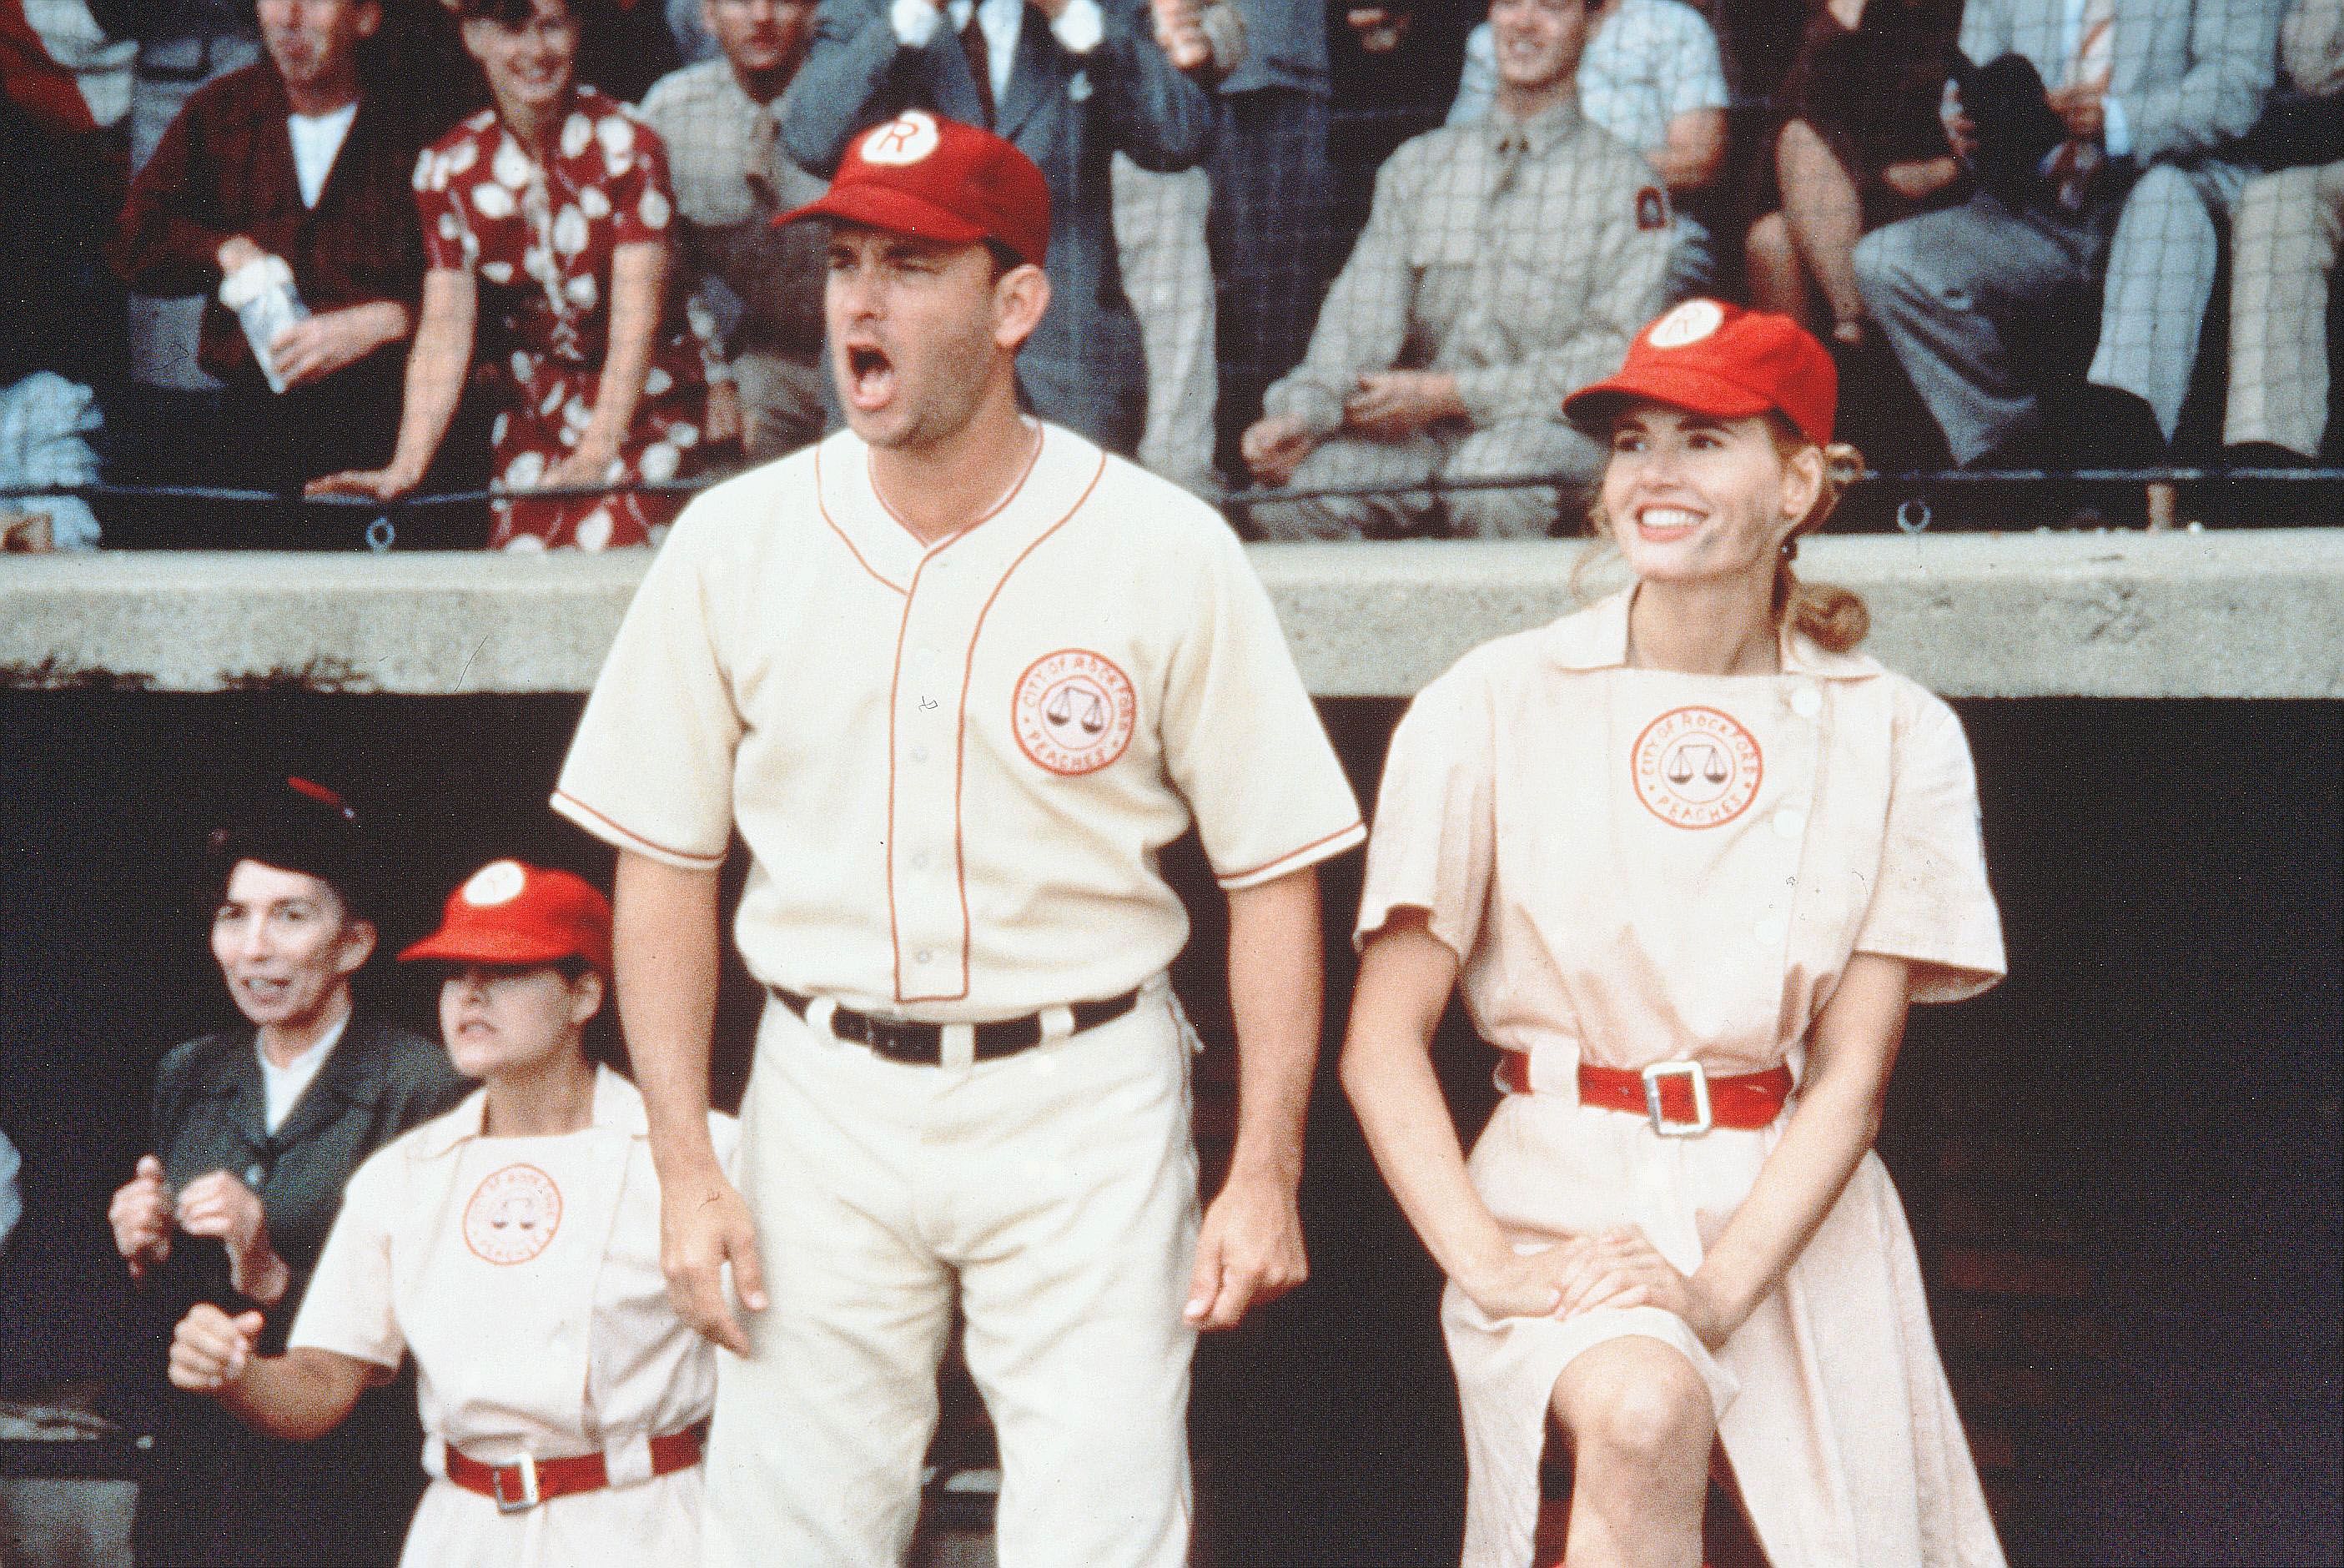 A League of Their Own 30th anniversary -- Where are they now? Gallery Wonderwall